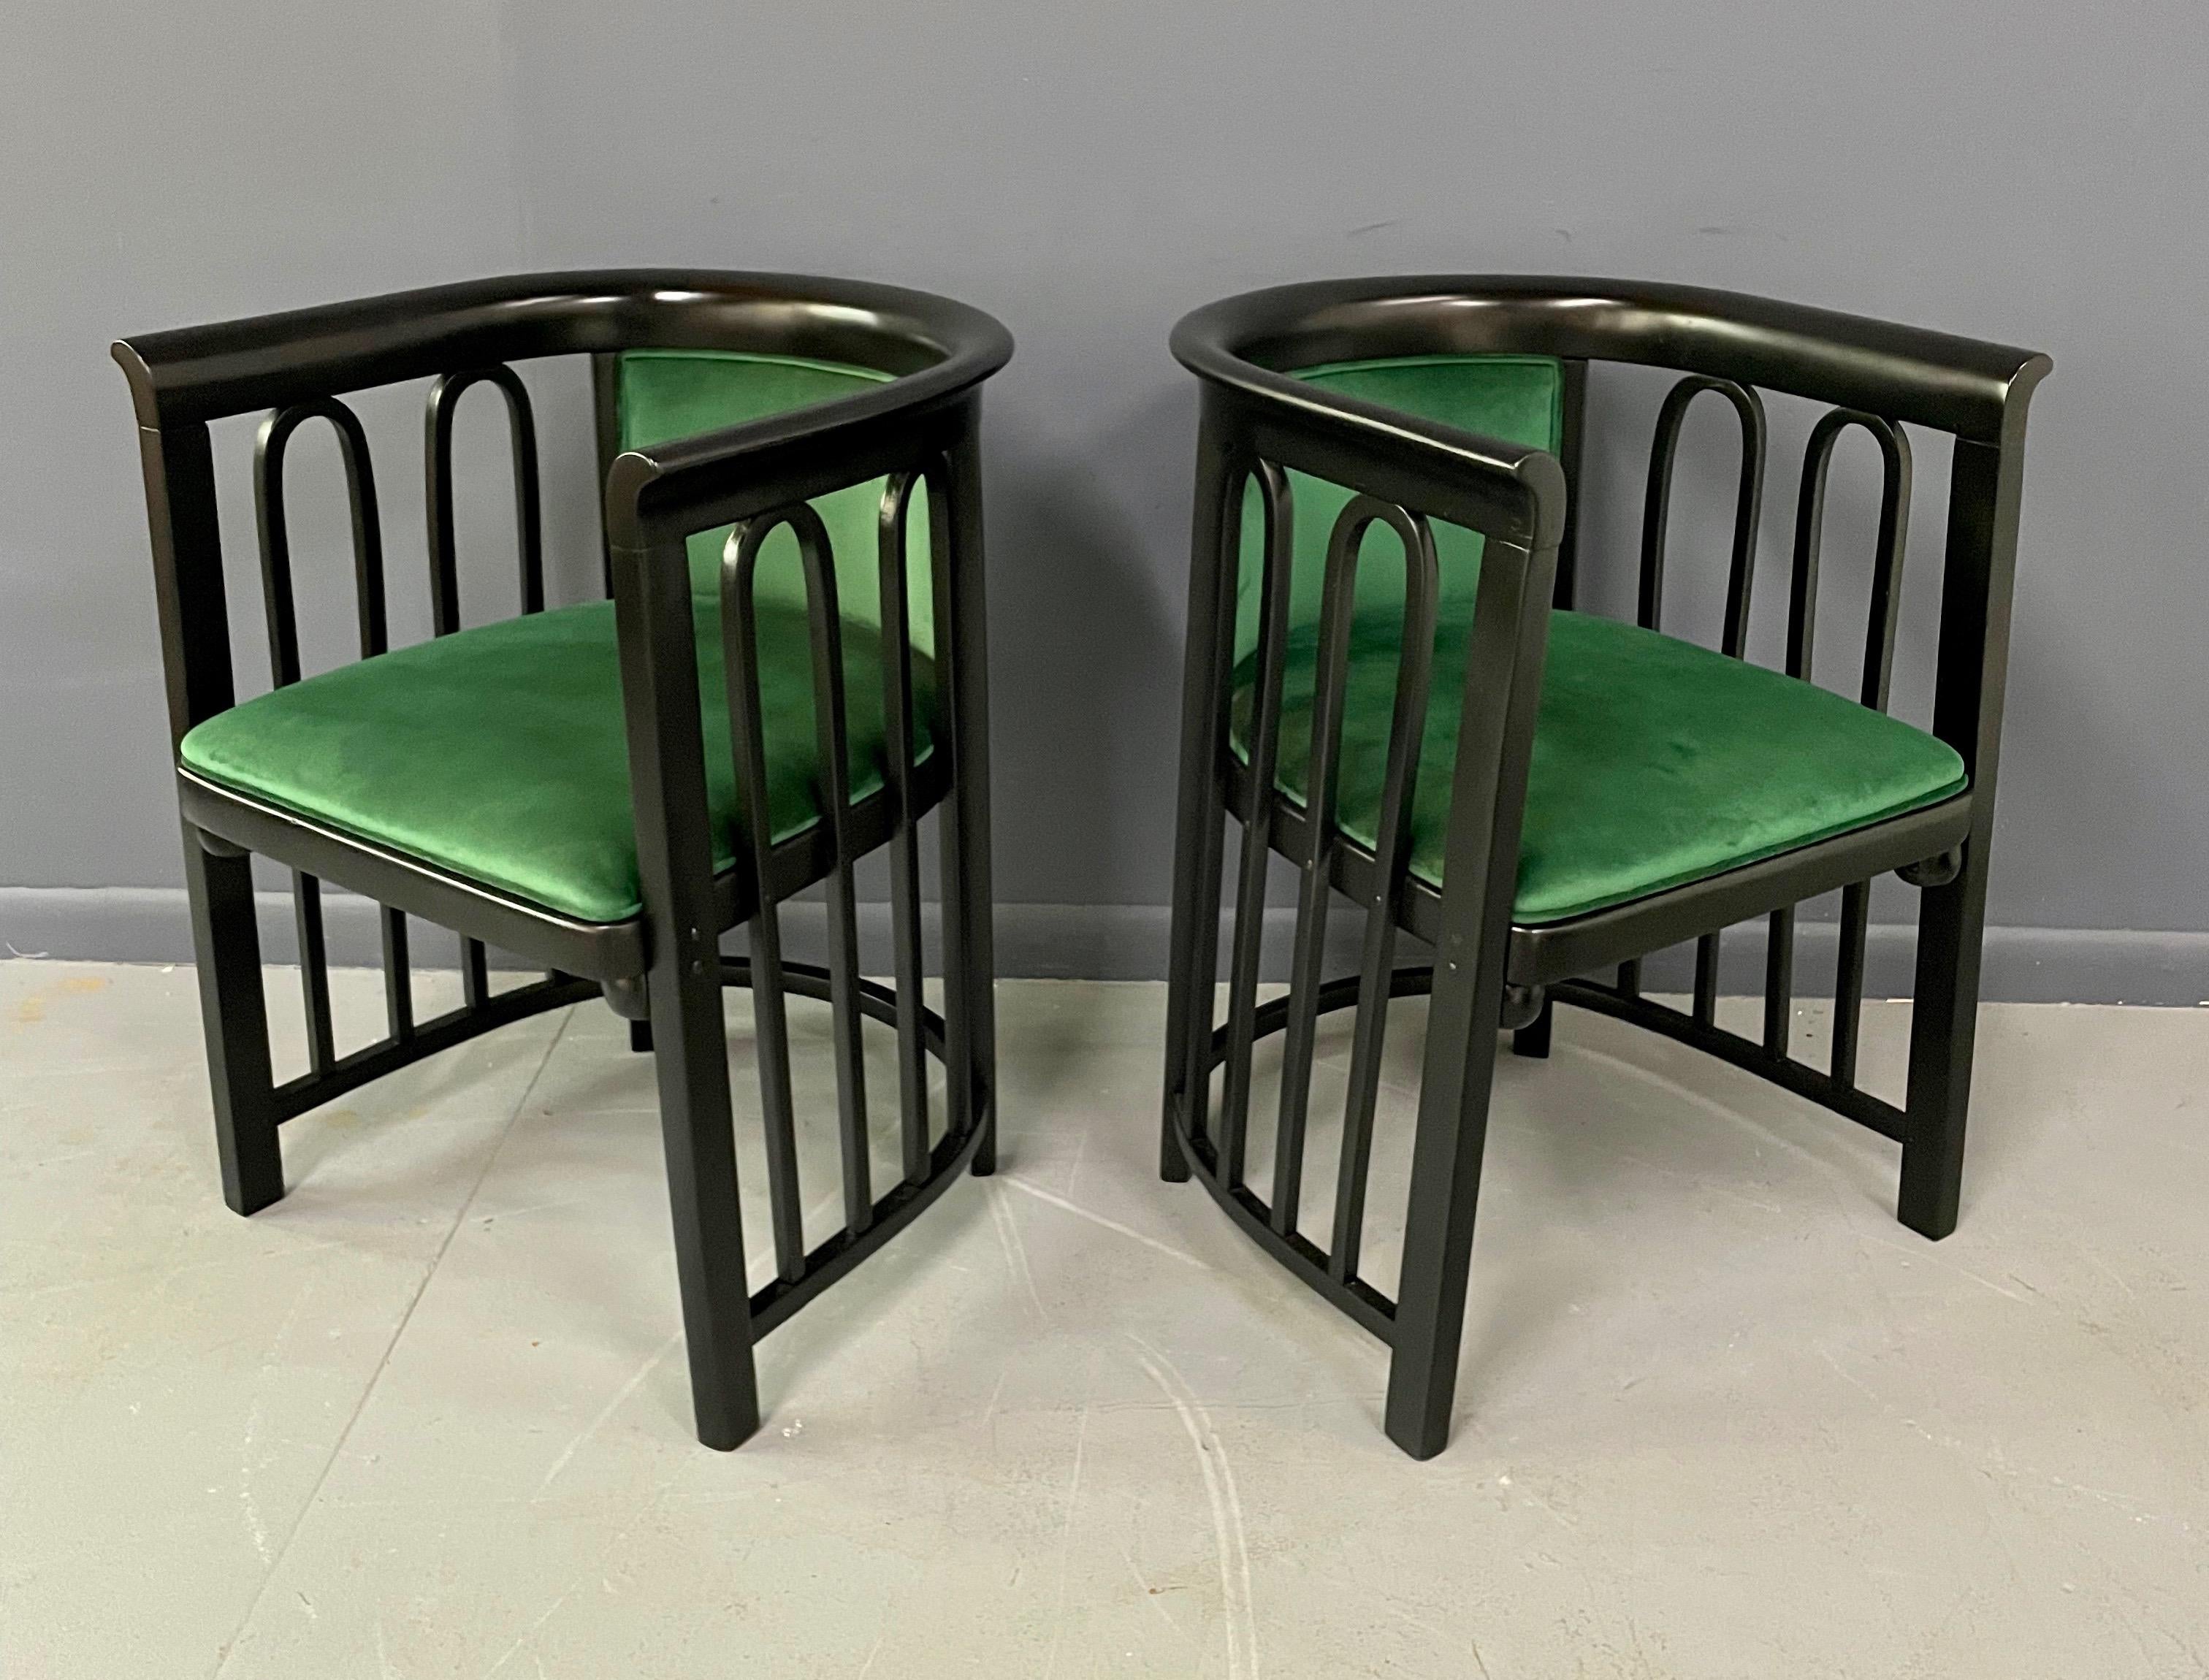 Josef Hoffman Pair of Secessionist Bentwood Barrel Back Arm Chairs for J&J Kohn For Sale 6